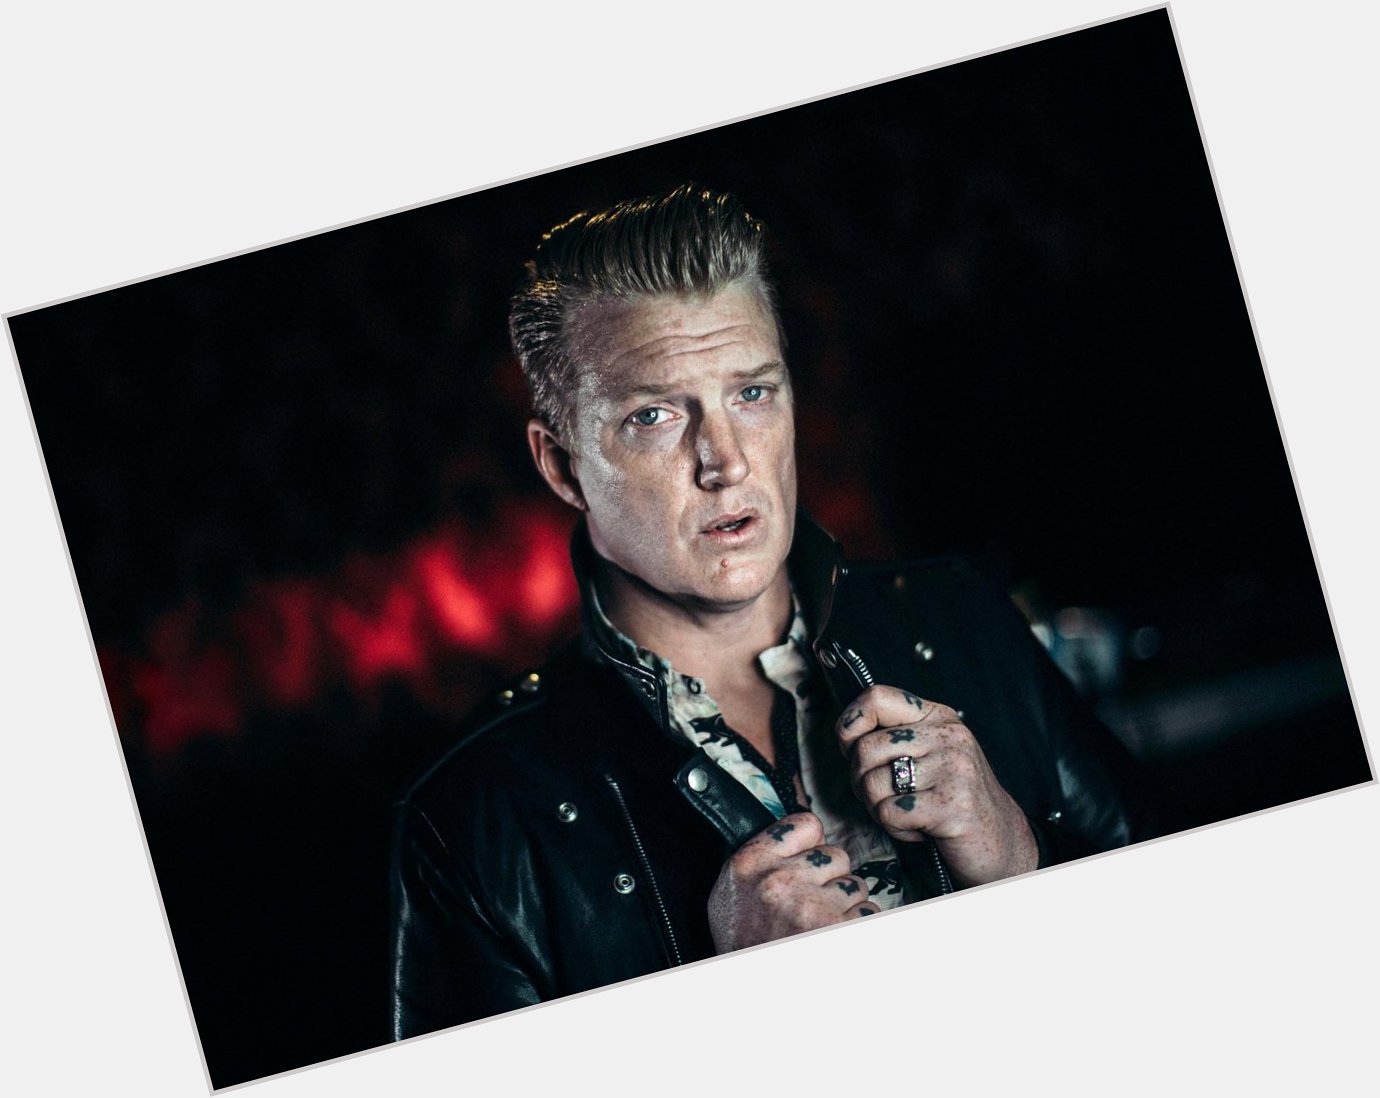 Also, Happy Birthday to Josh Homme...   My favorite musician on the planet, currently. 